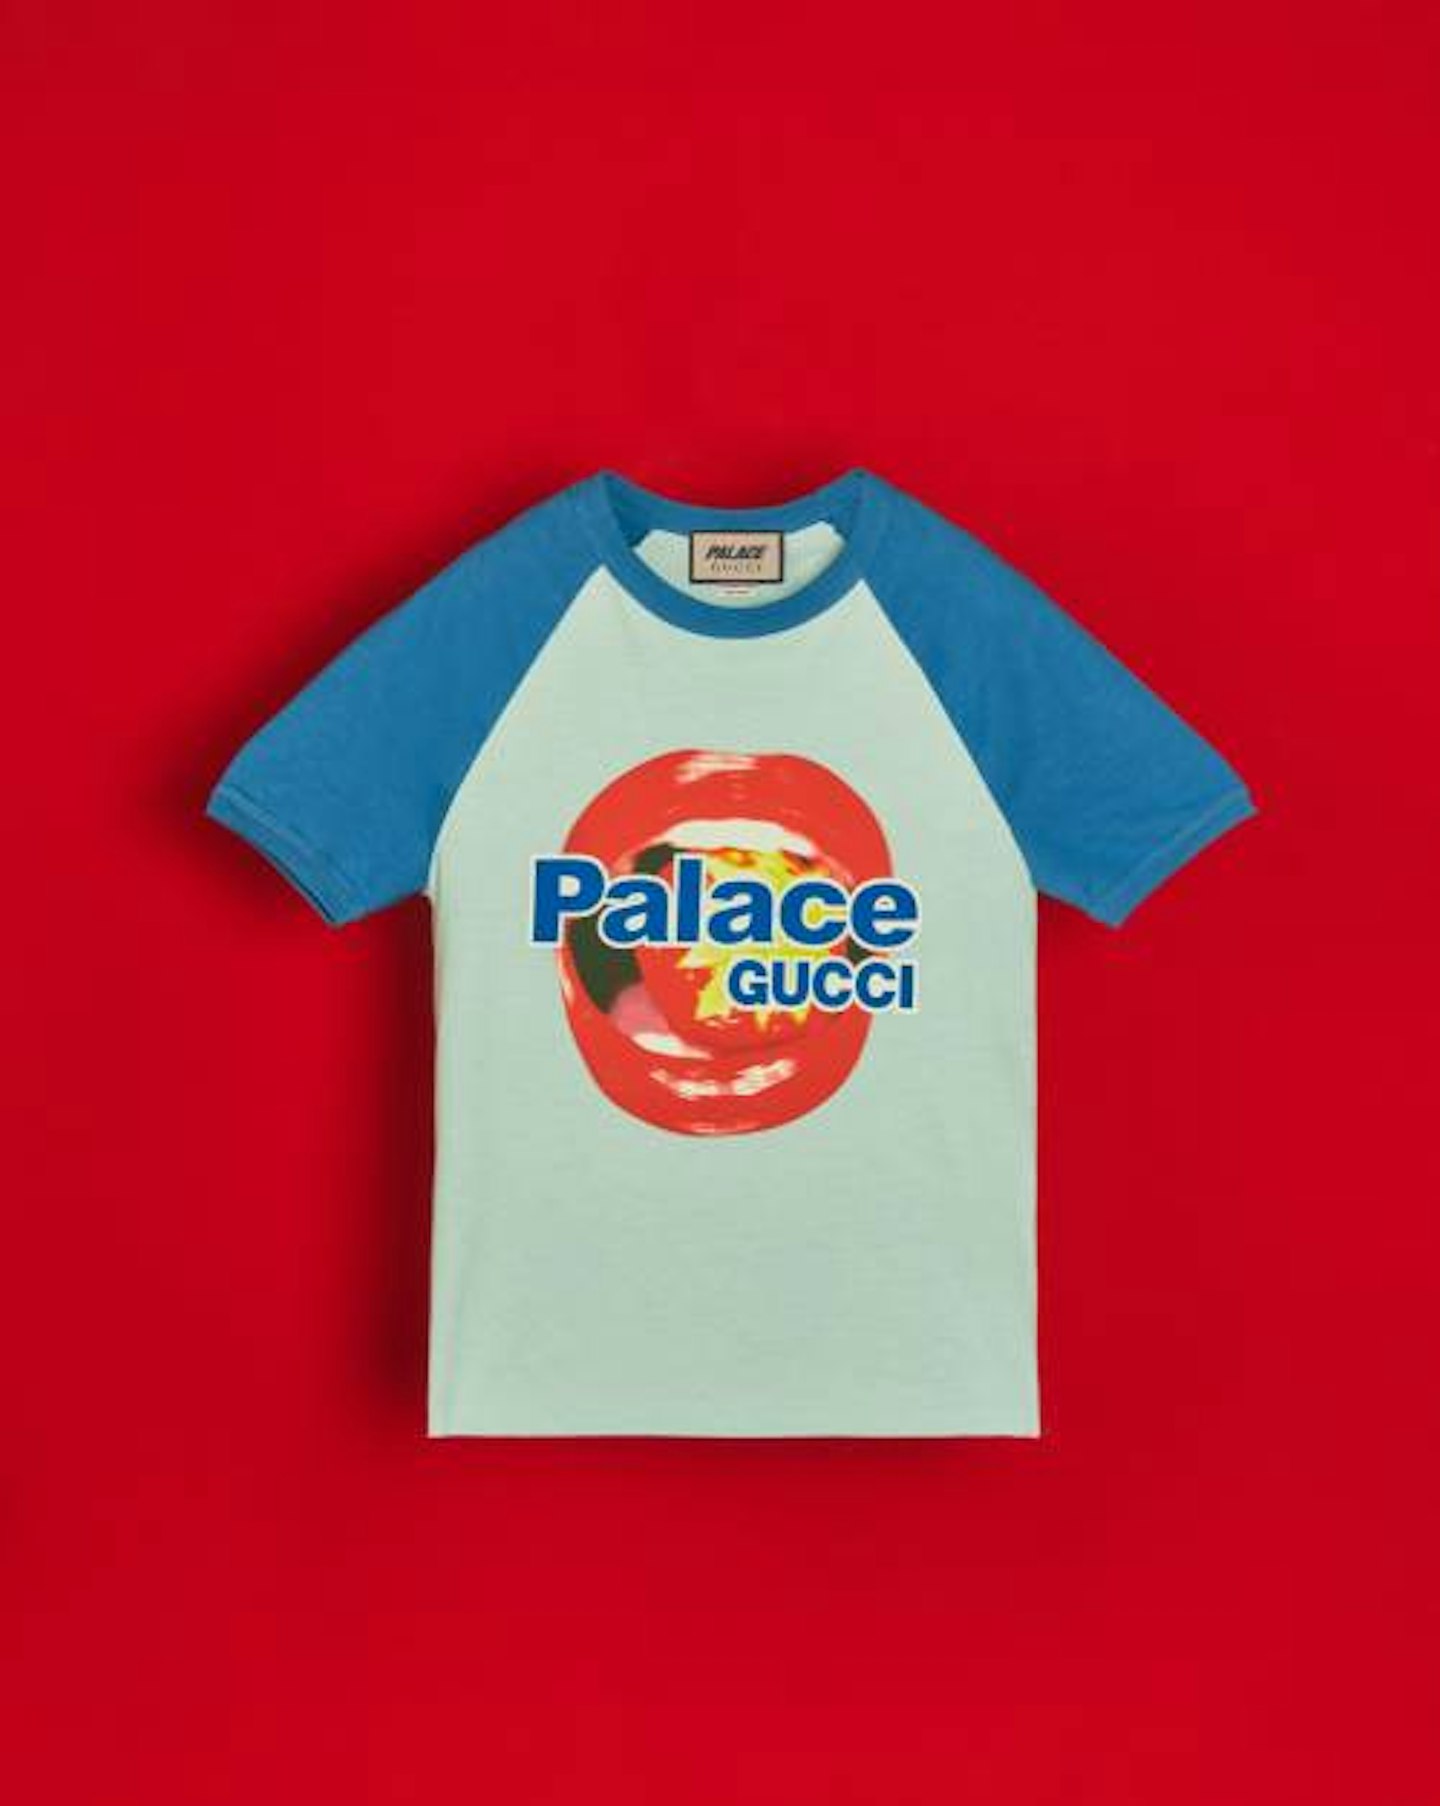 The Palace Gucci collaboration is big, big news